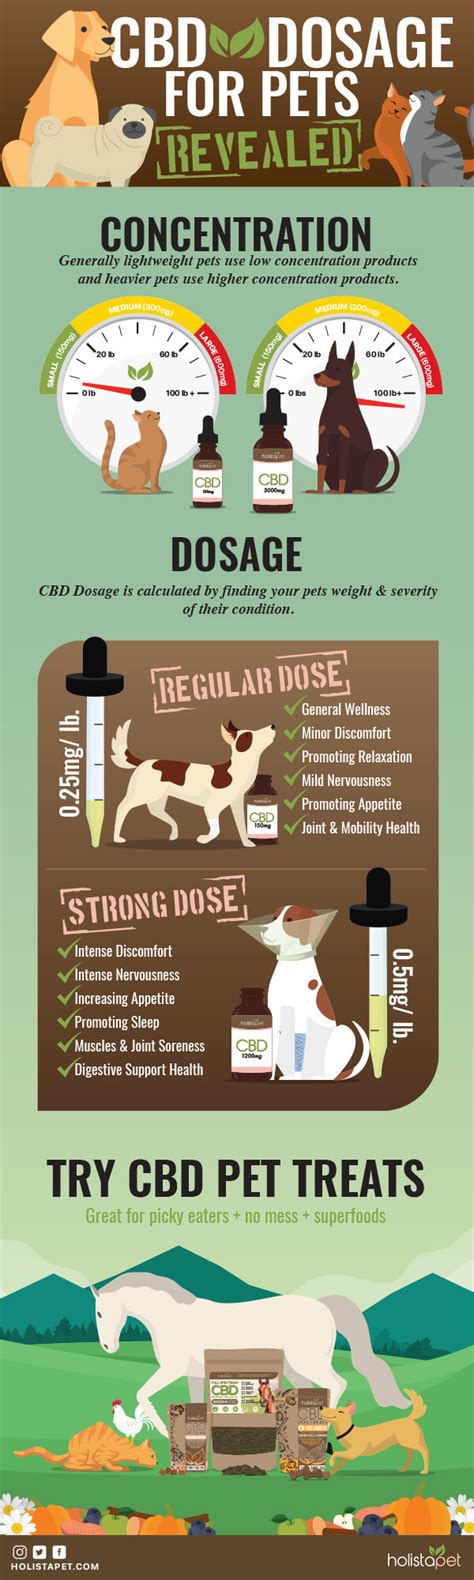 How Much Cbd Should I Give To My Dog